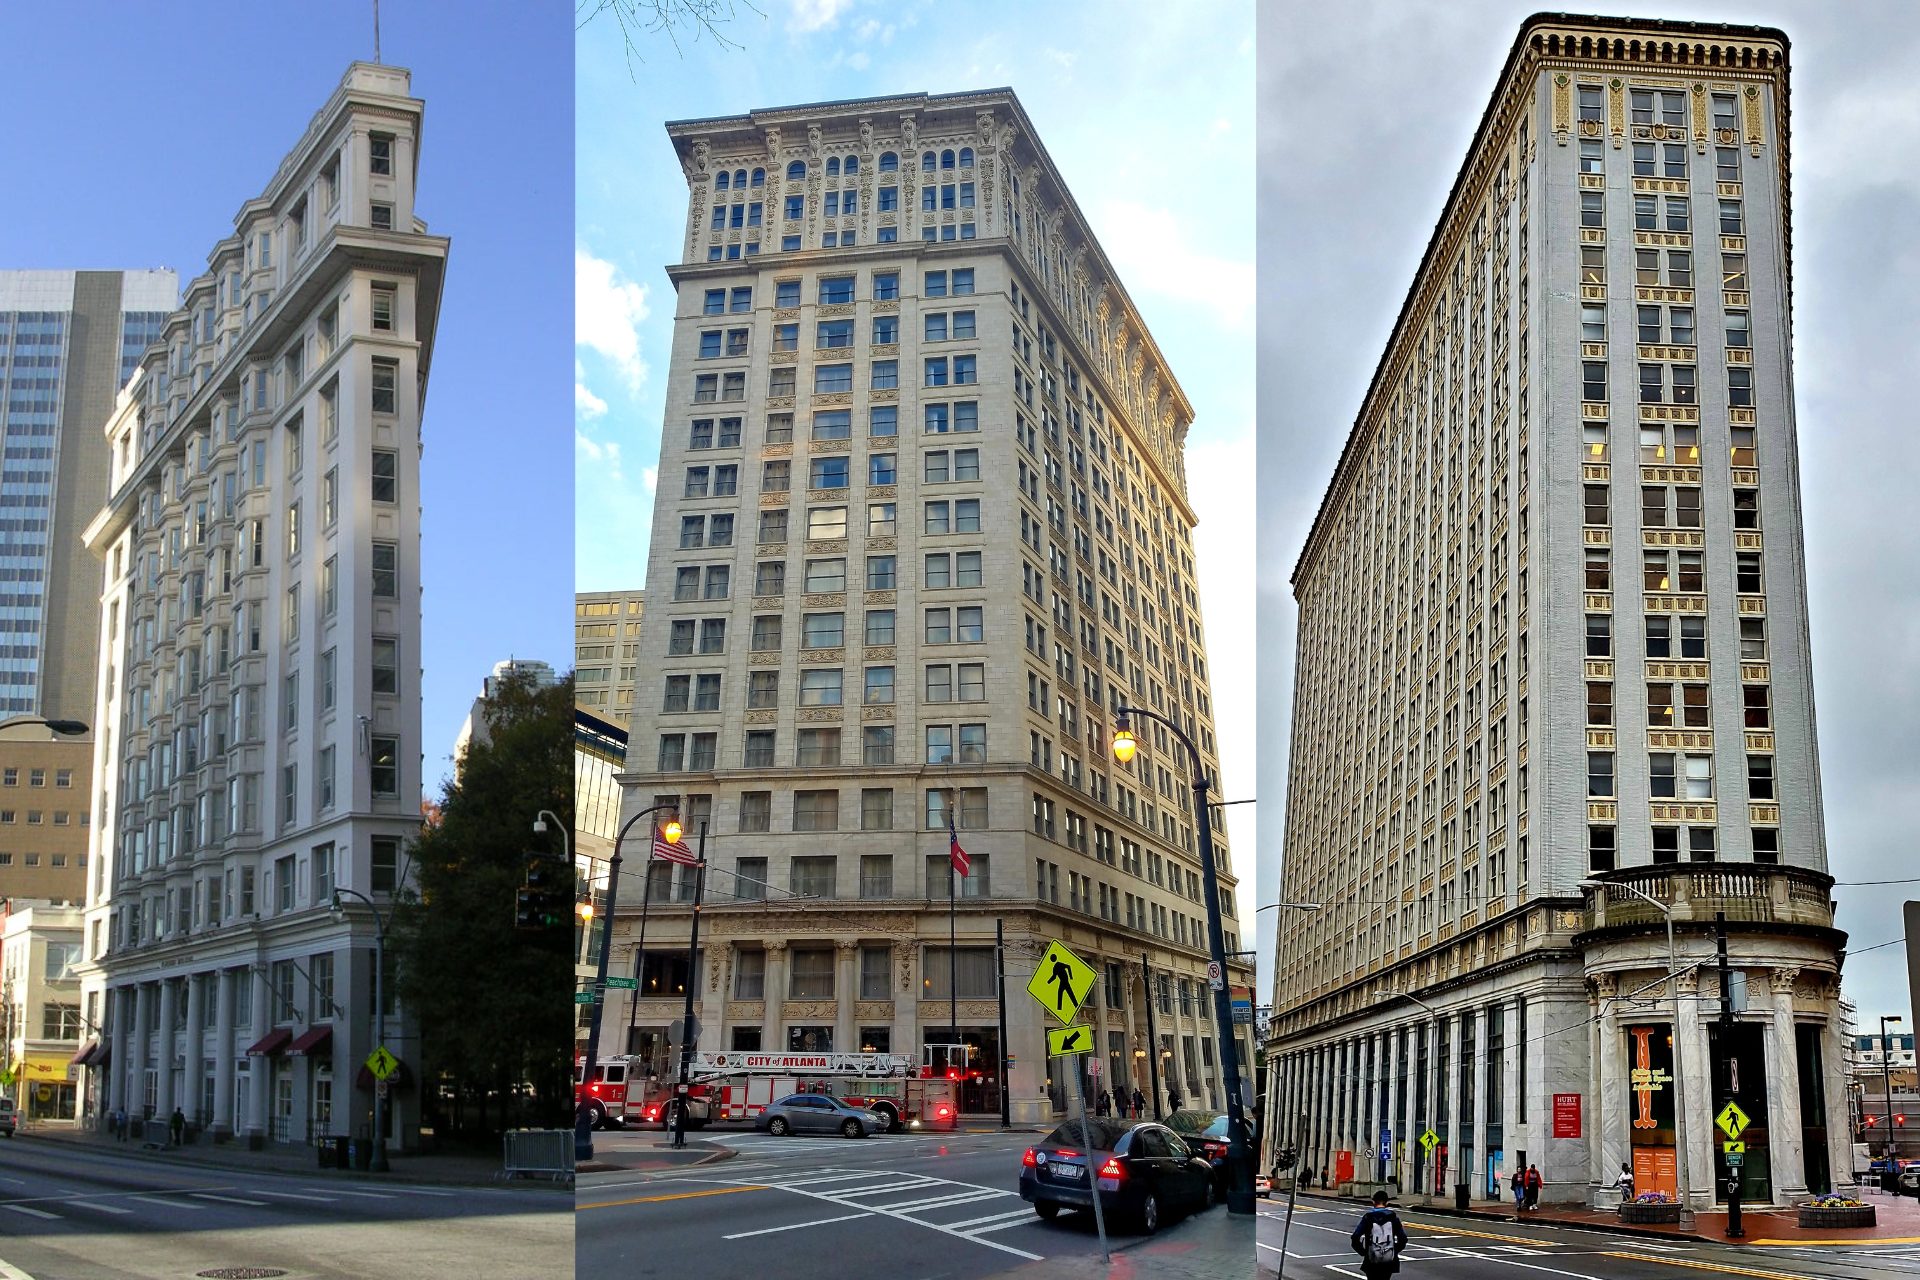 Photos of three famous Atlanta buildings: the Flatiron Building, the Candler Building, and the Hurt Building